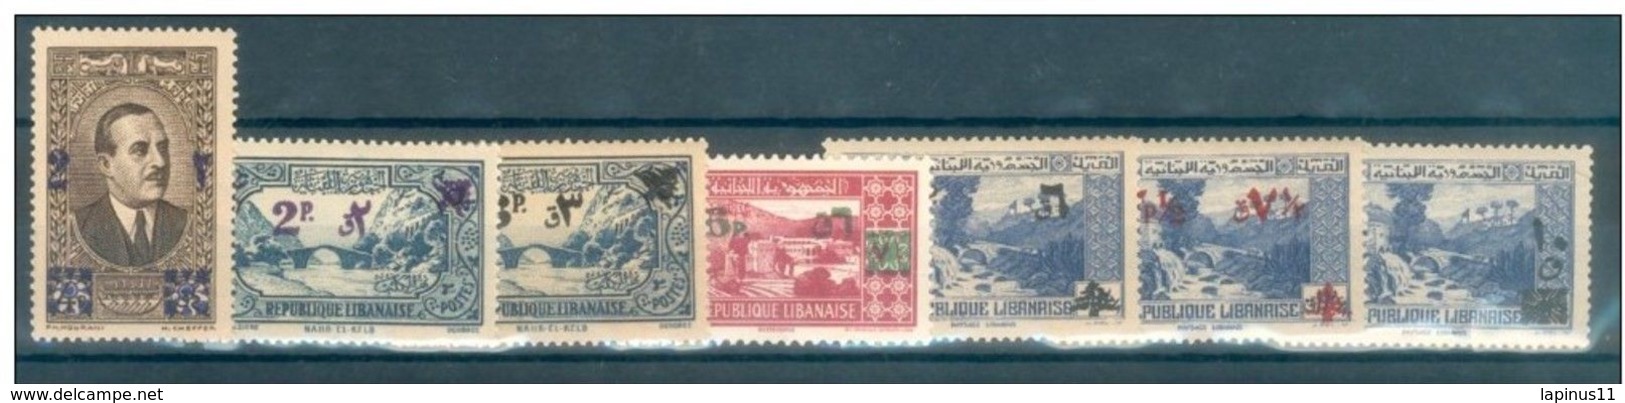 Lebanon 1943 Yvert No180-186 Timbres Surchargee Complete Set MNH - Líbano